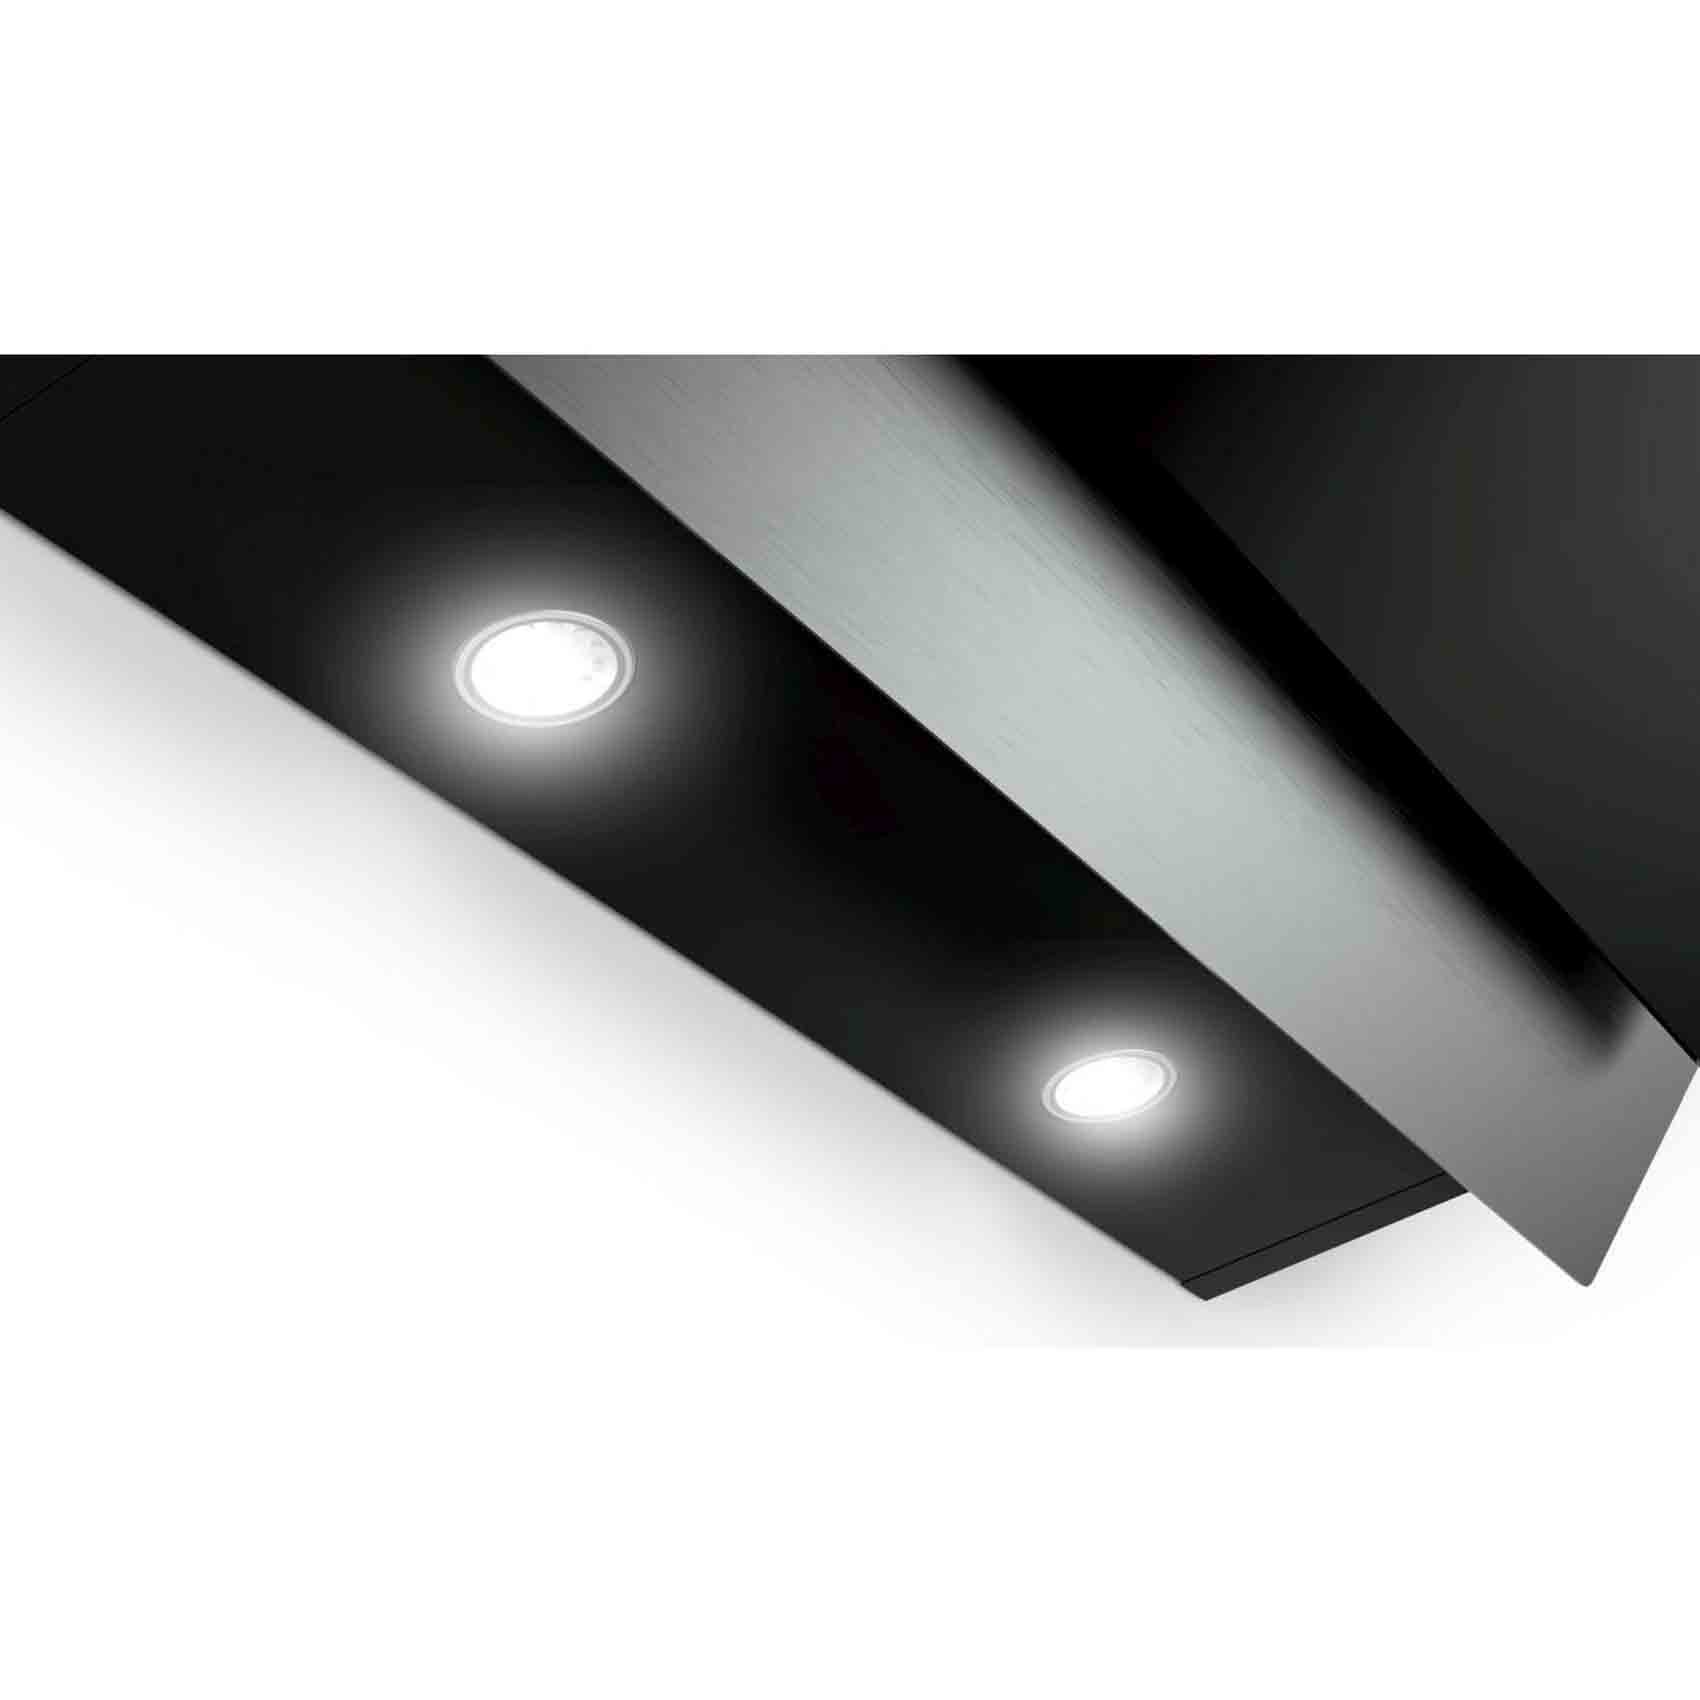 Bosch Serie 4 Wall-Mounted Cooker Hood 90 Cm, Clear Glass Black Printed, Min 1 Year Manufacturer Warranty